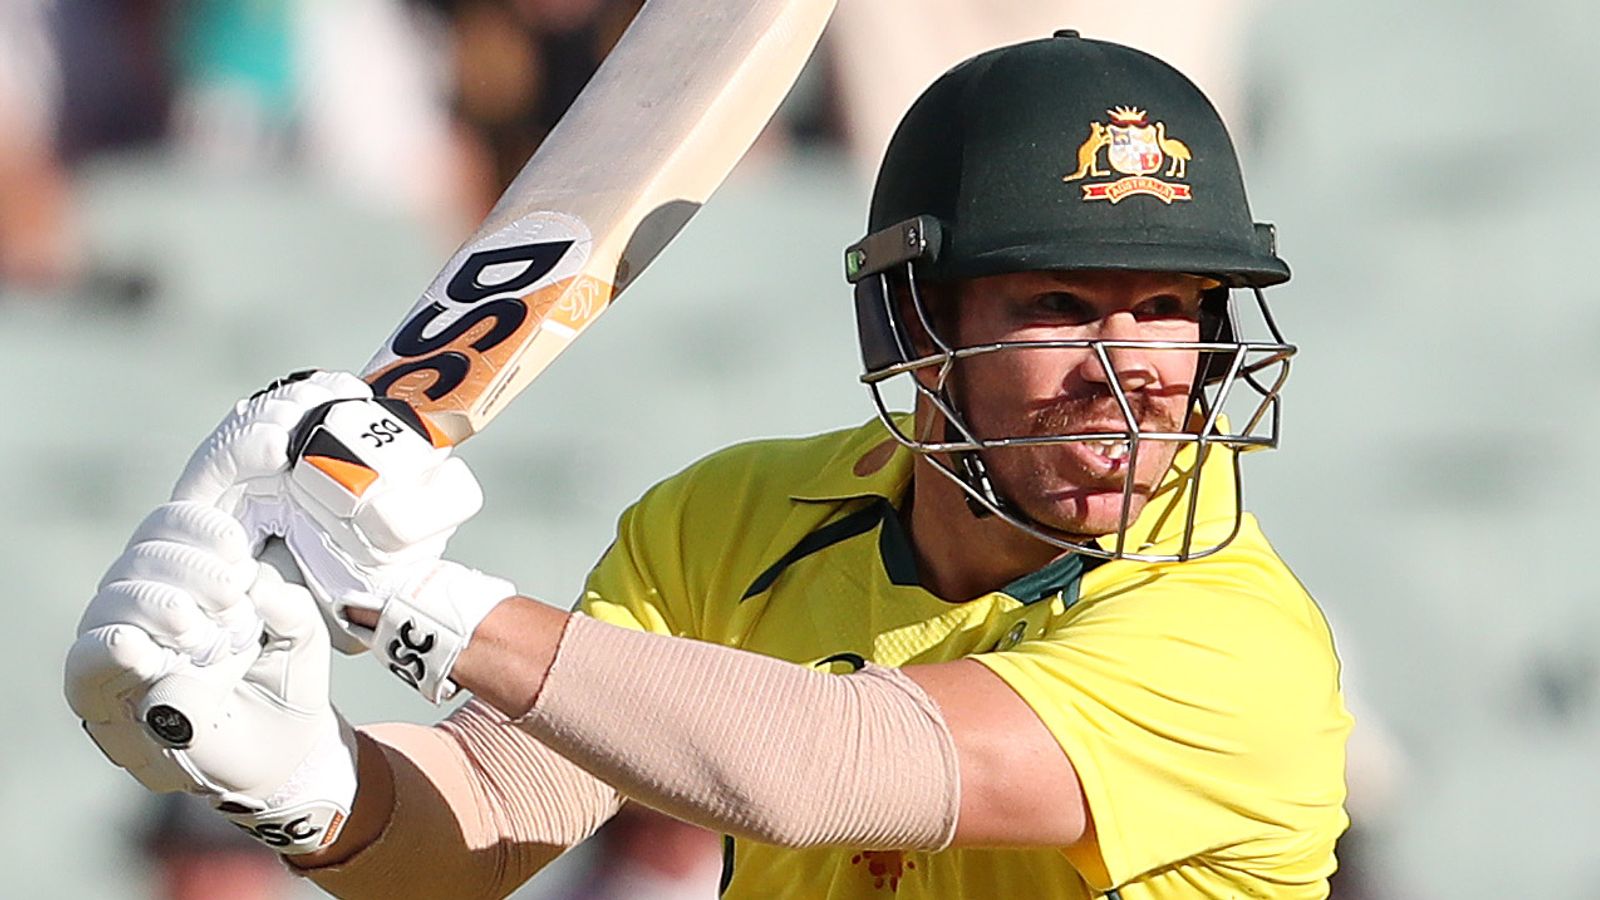 David Warner could have Australia leadership ban lifted after change in player code of conduct